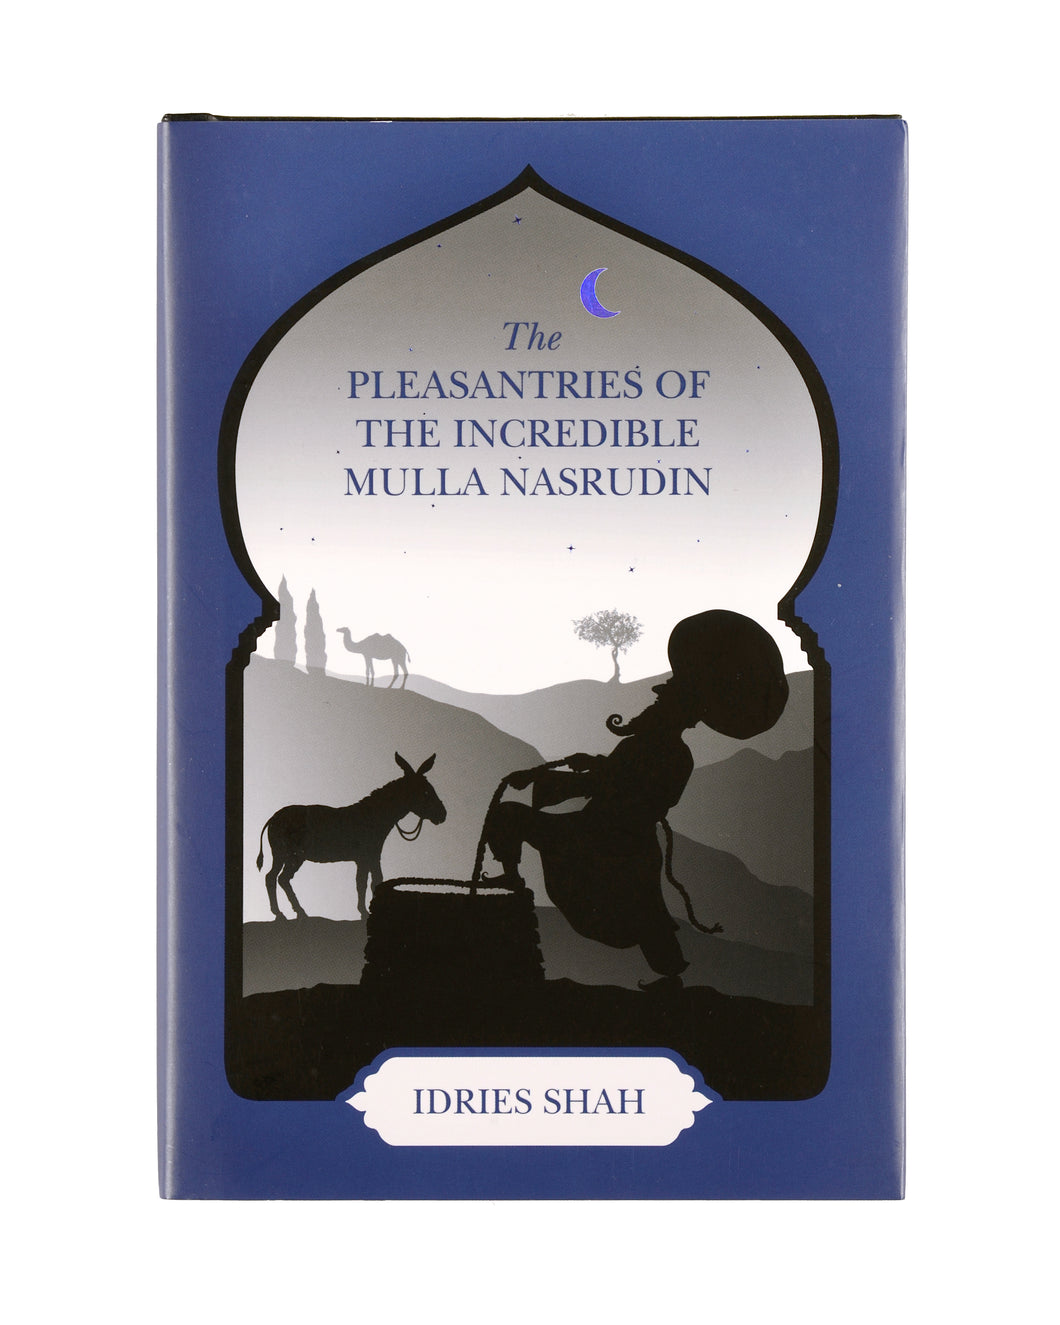 The Pleasantries of the Incredible Mulla Nasrudin Limited Edition Hardcover